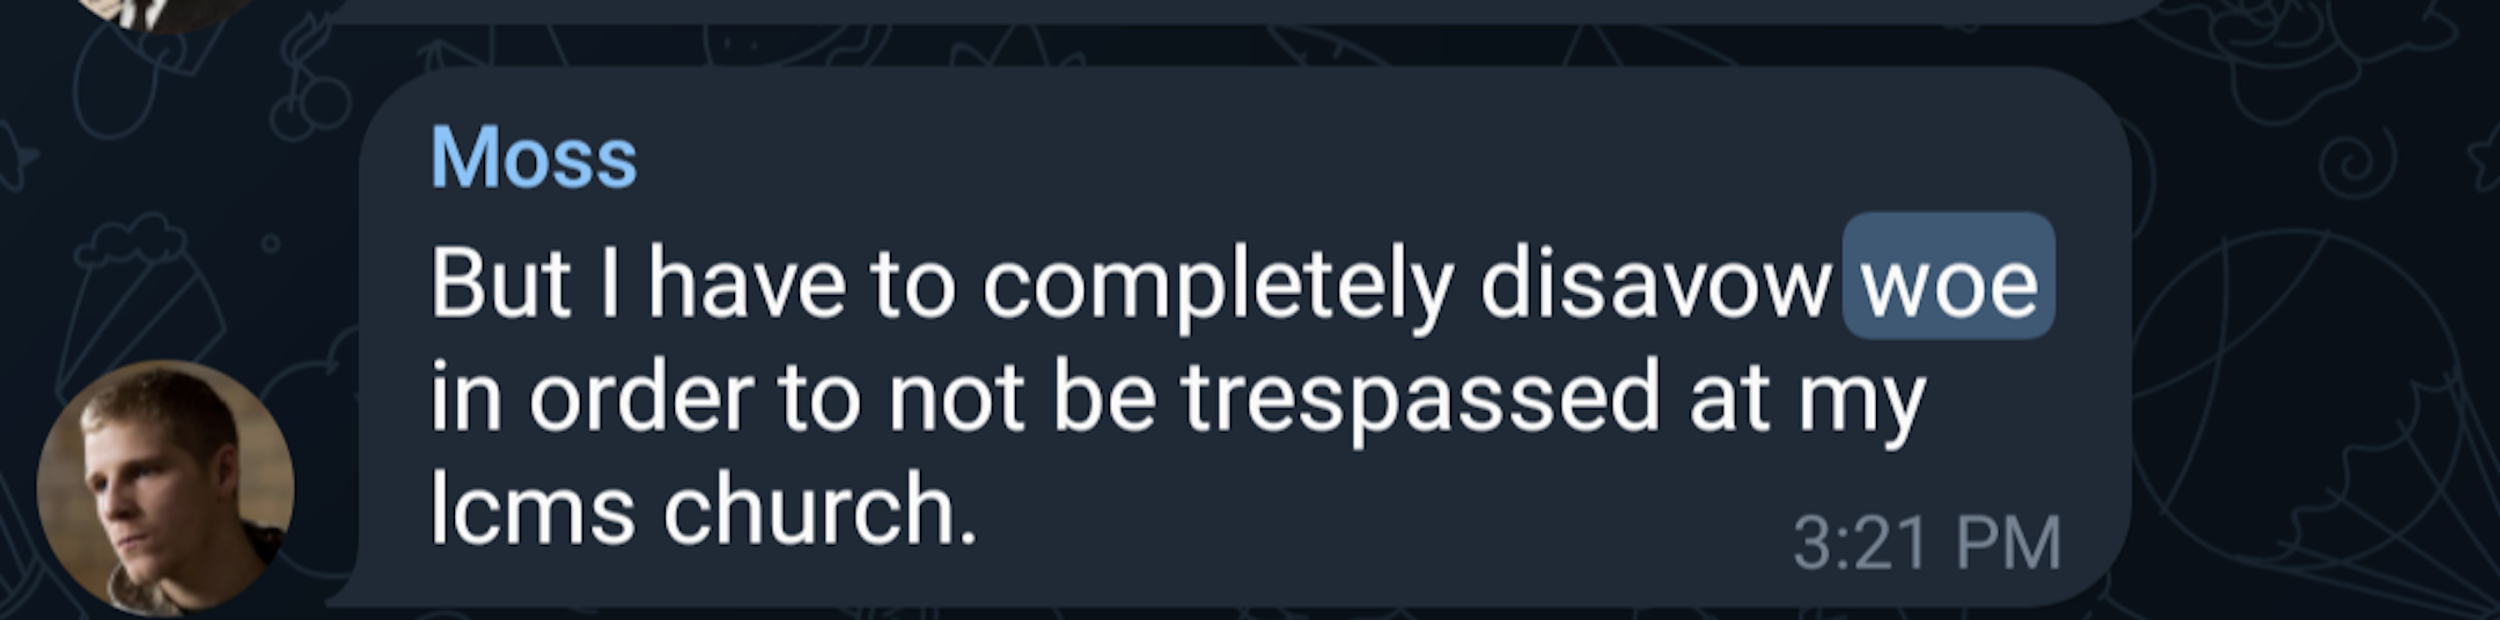 User moss on telegram: I have to completely disavow Woe to not be trespassed at my church.